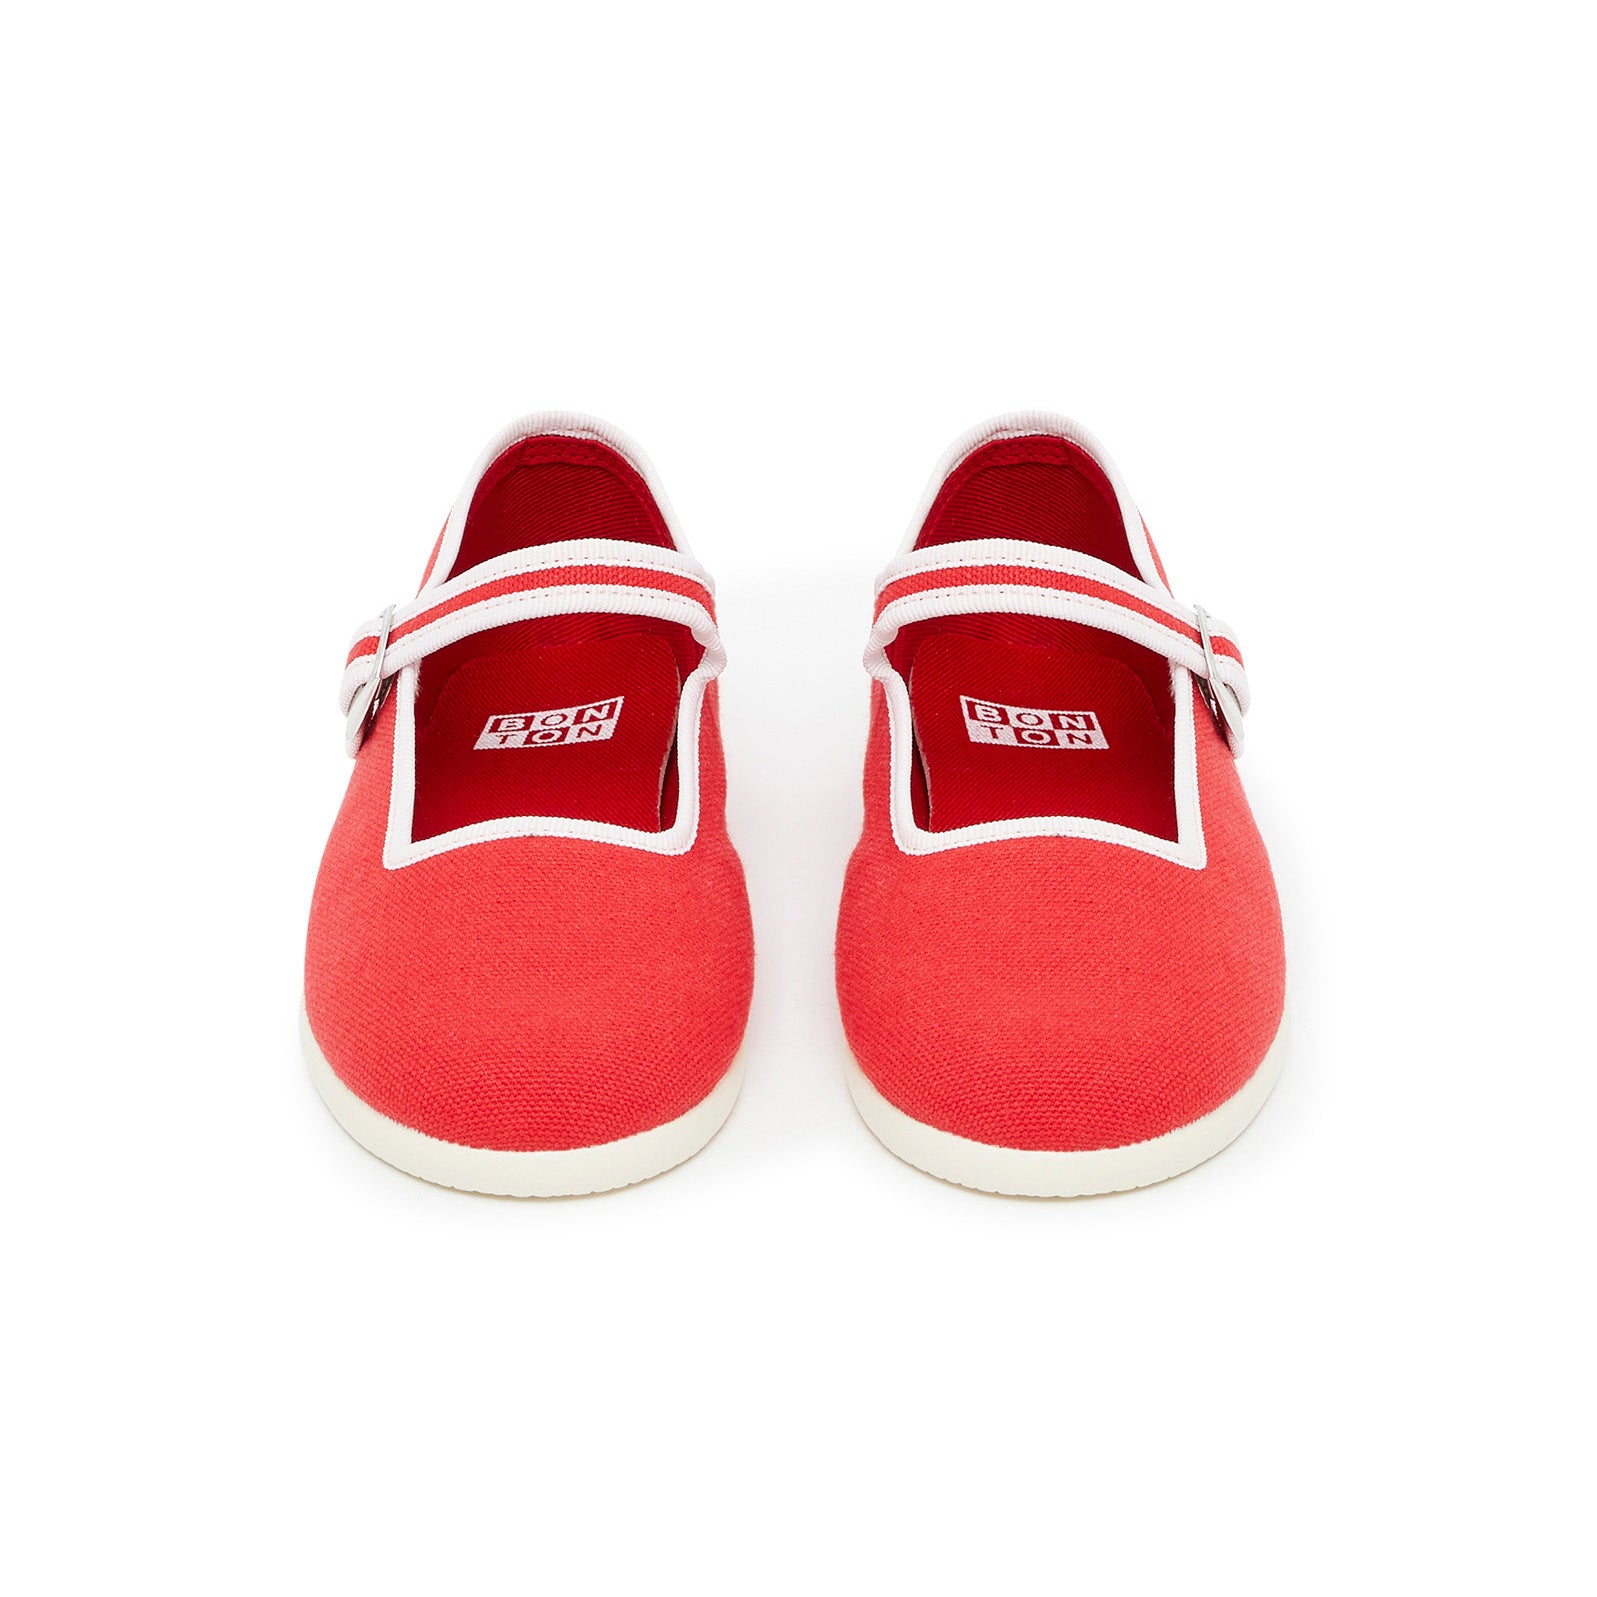 Girls Red Cotton Shoes